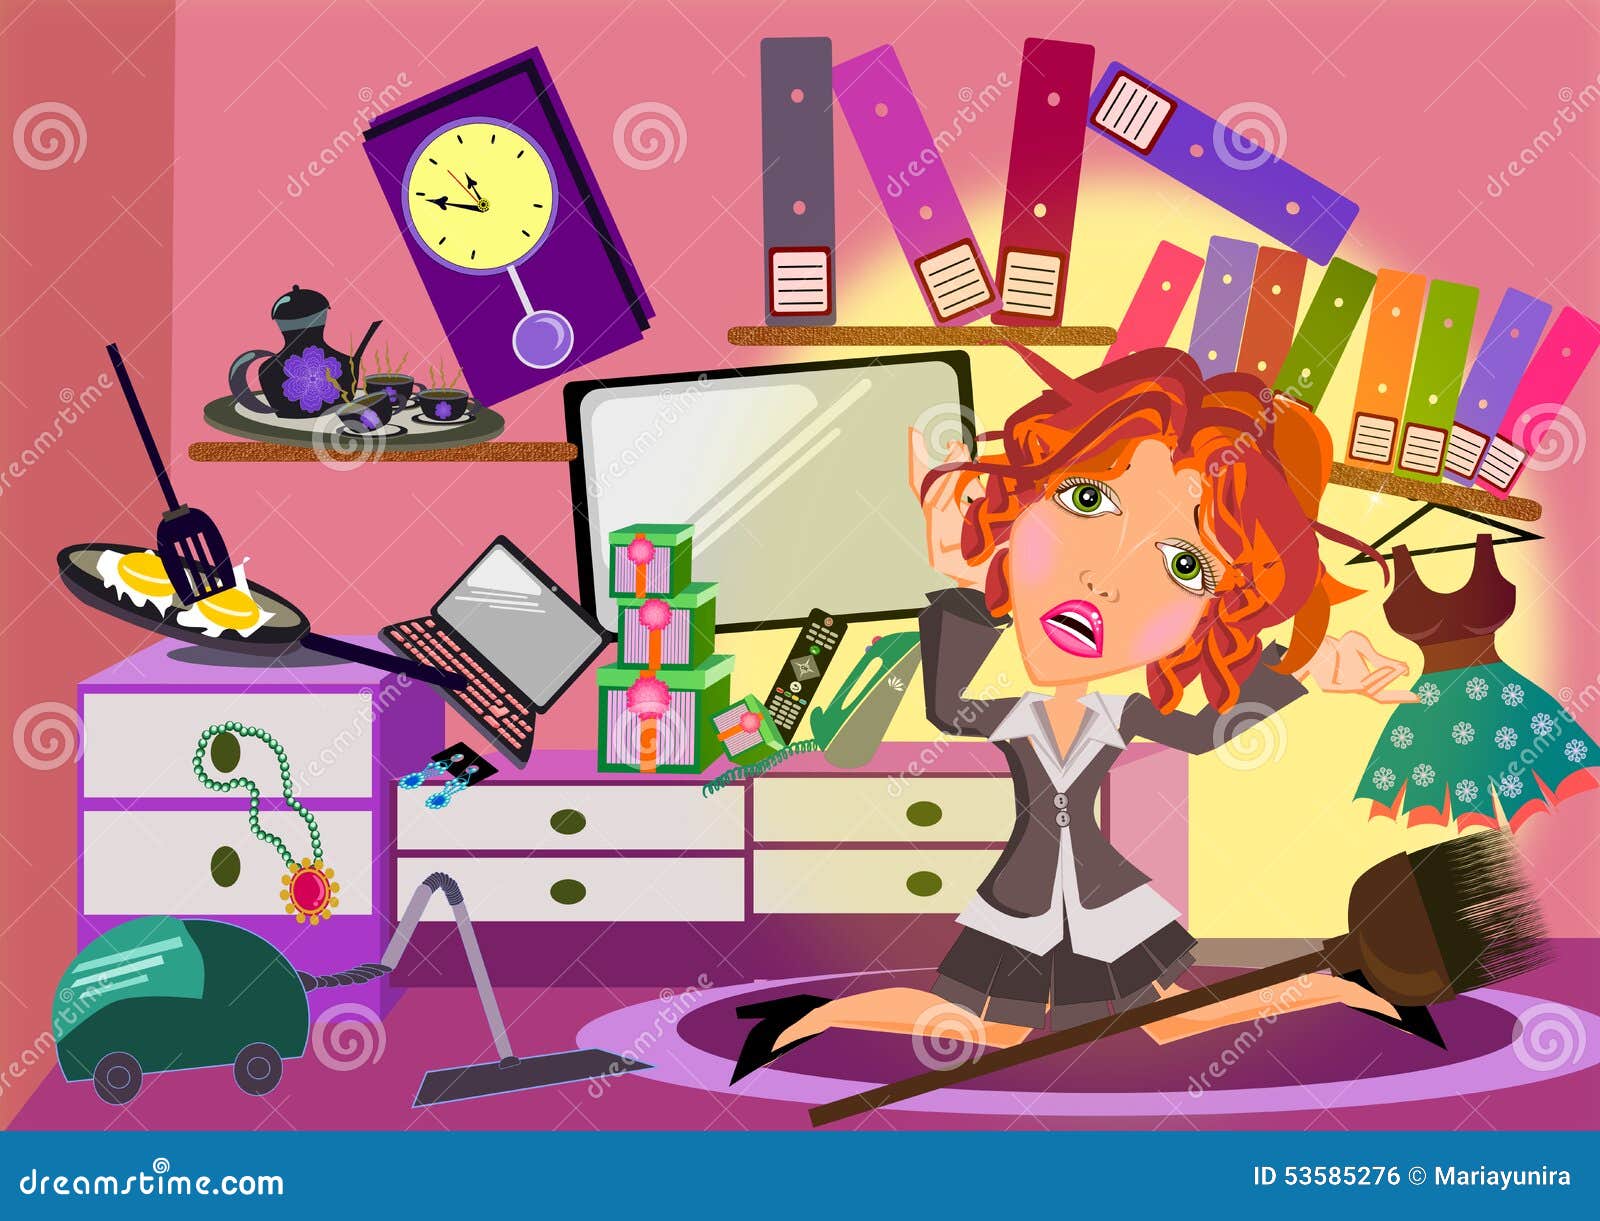 clipart messy room - photo #37